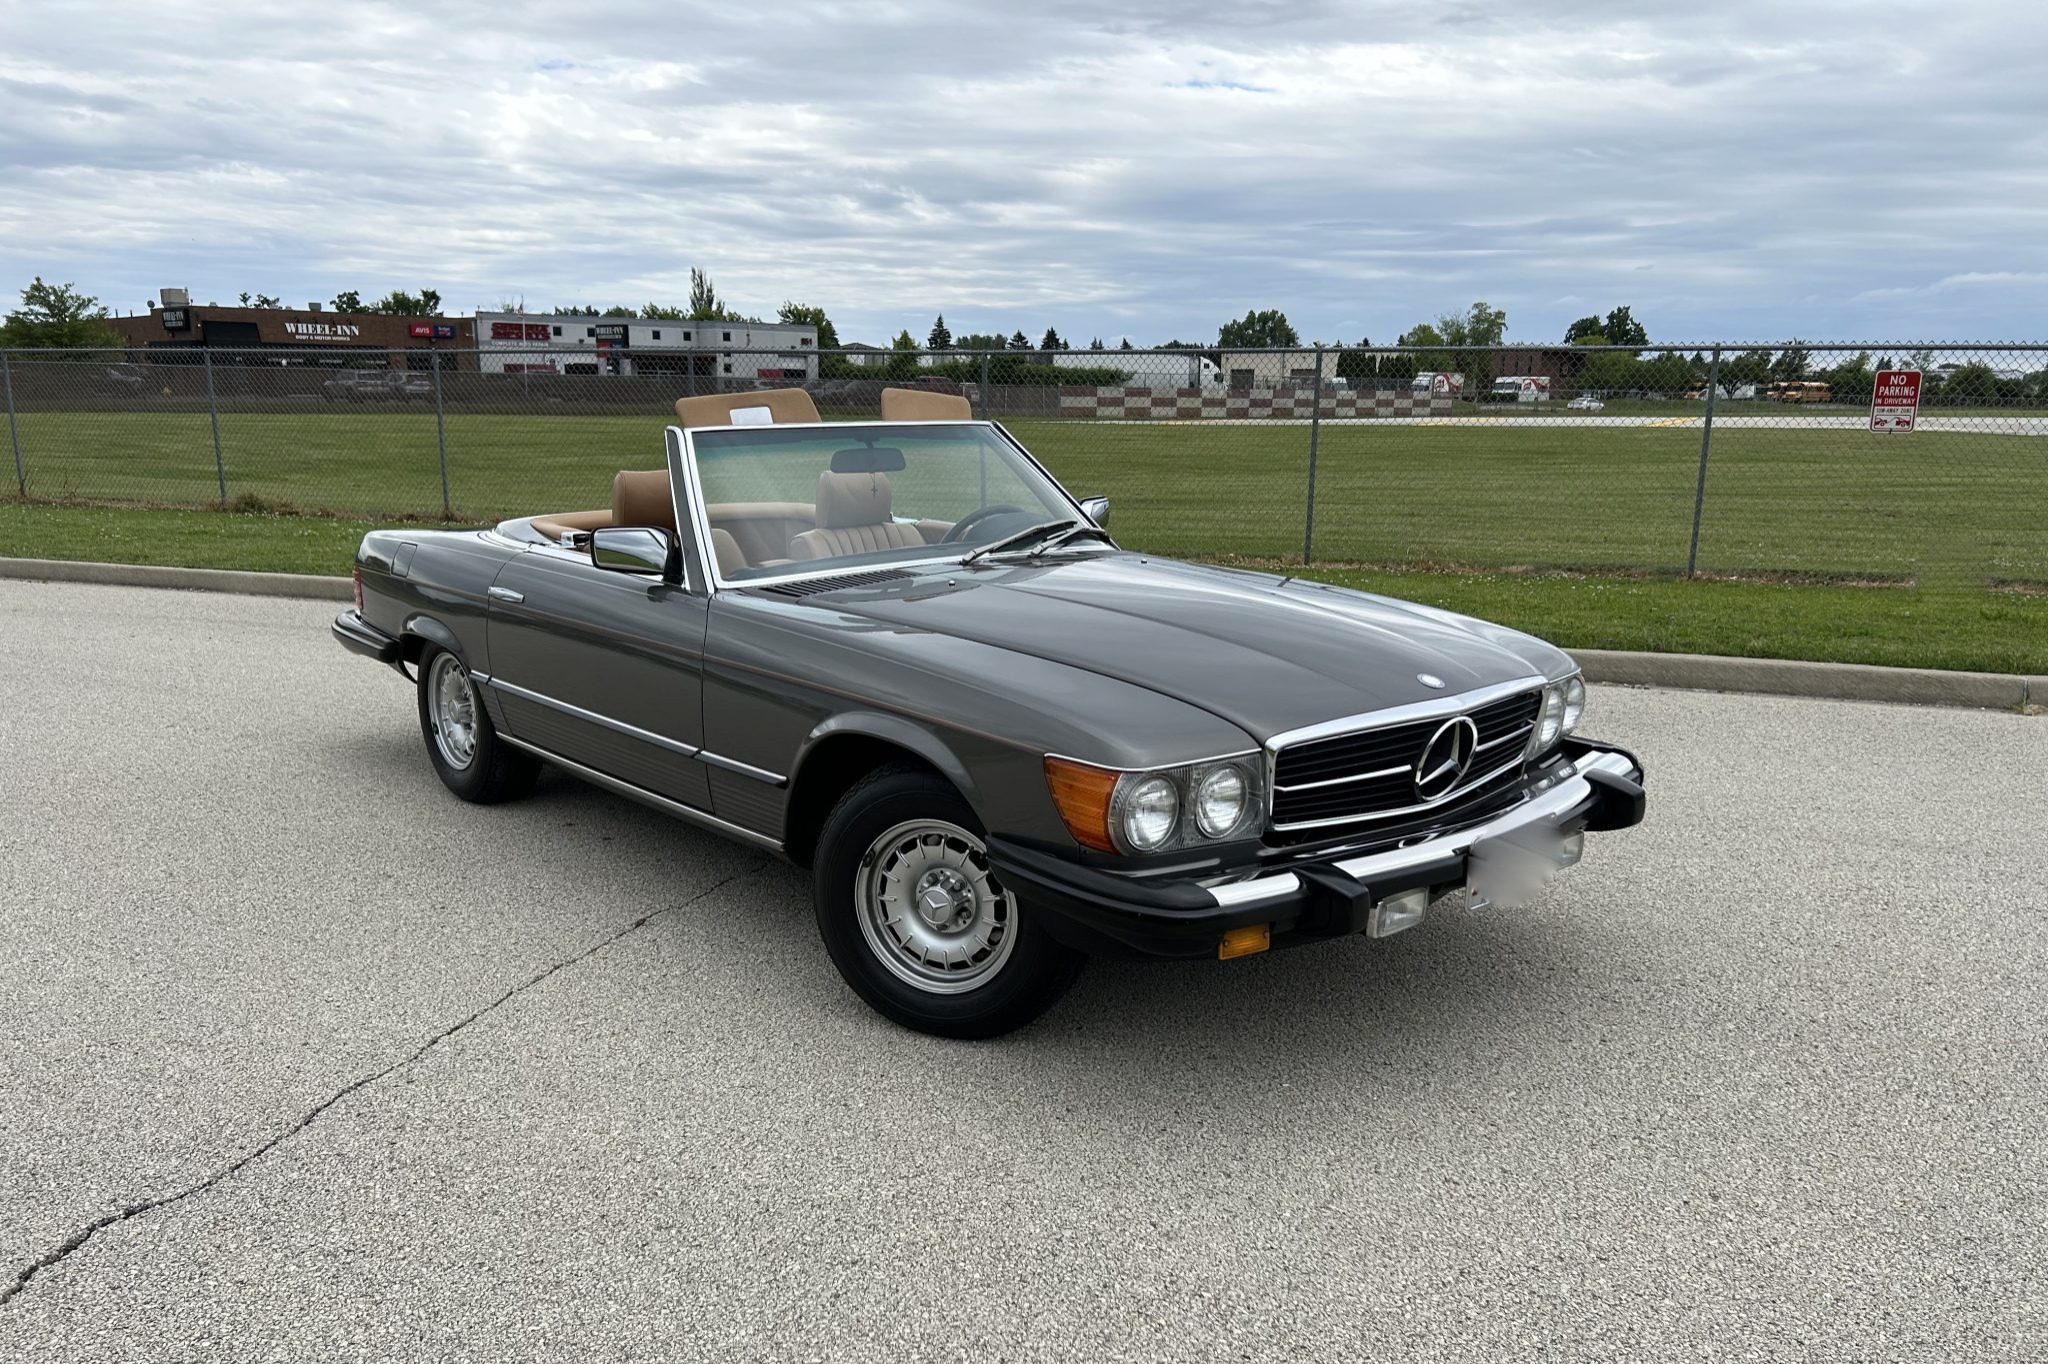 Used Original-Owner 1984 Mercedes-Benz 380SL Review